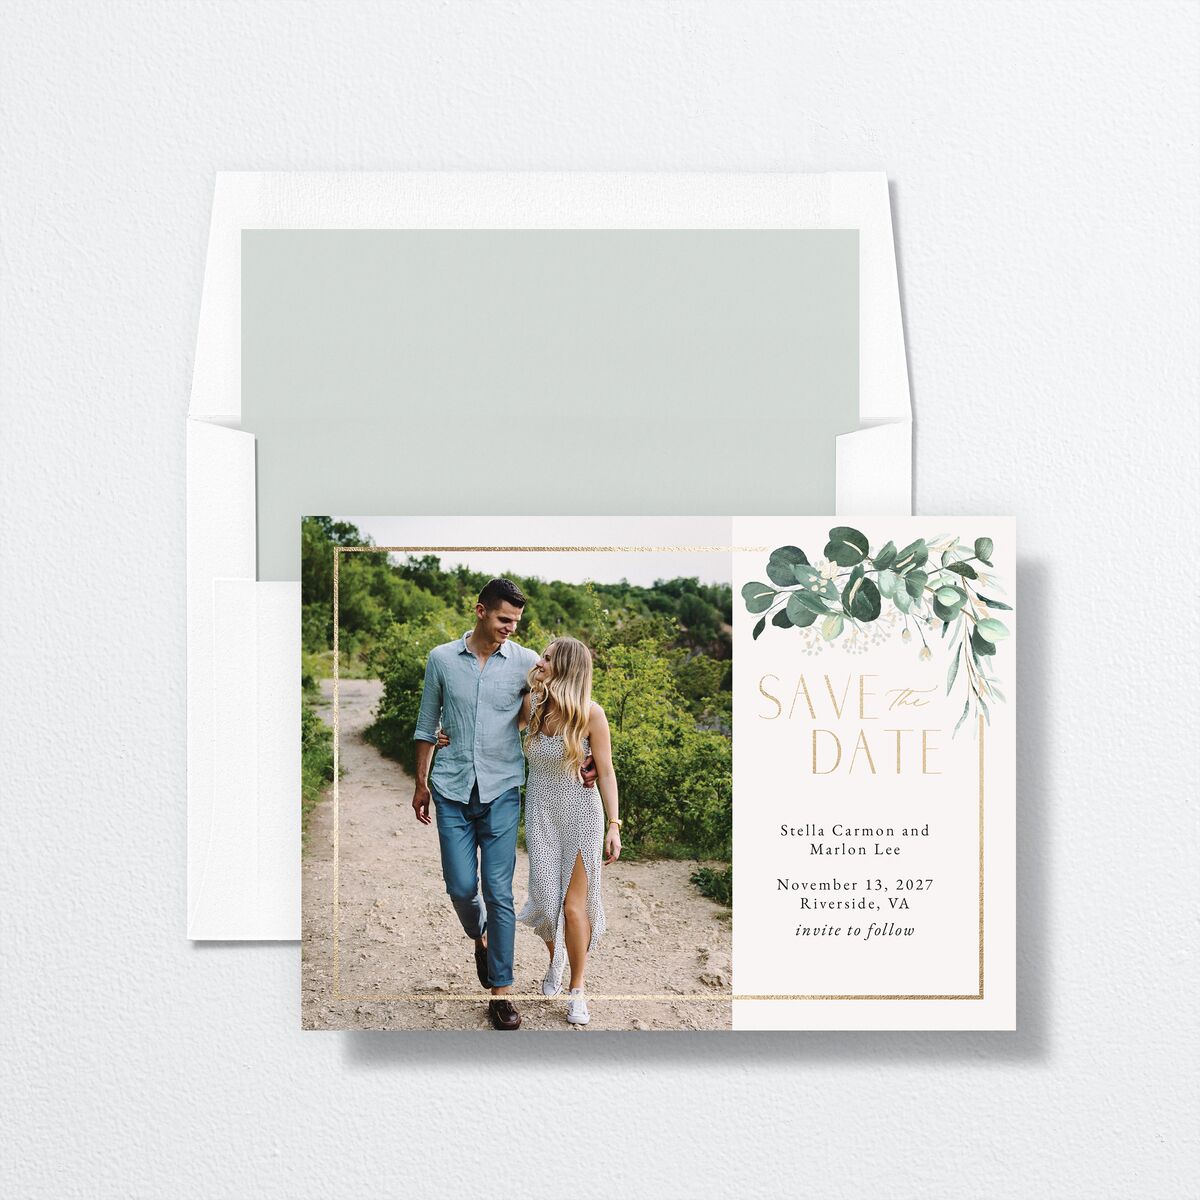 Timeless Hoop Save The Date Cards envelope-and-liner in White